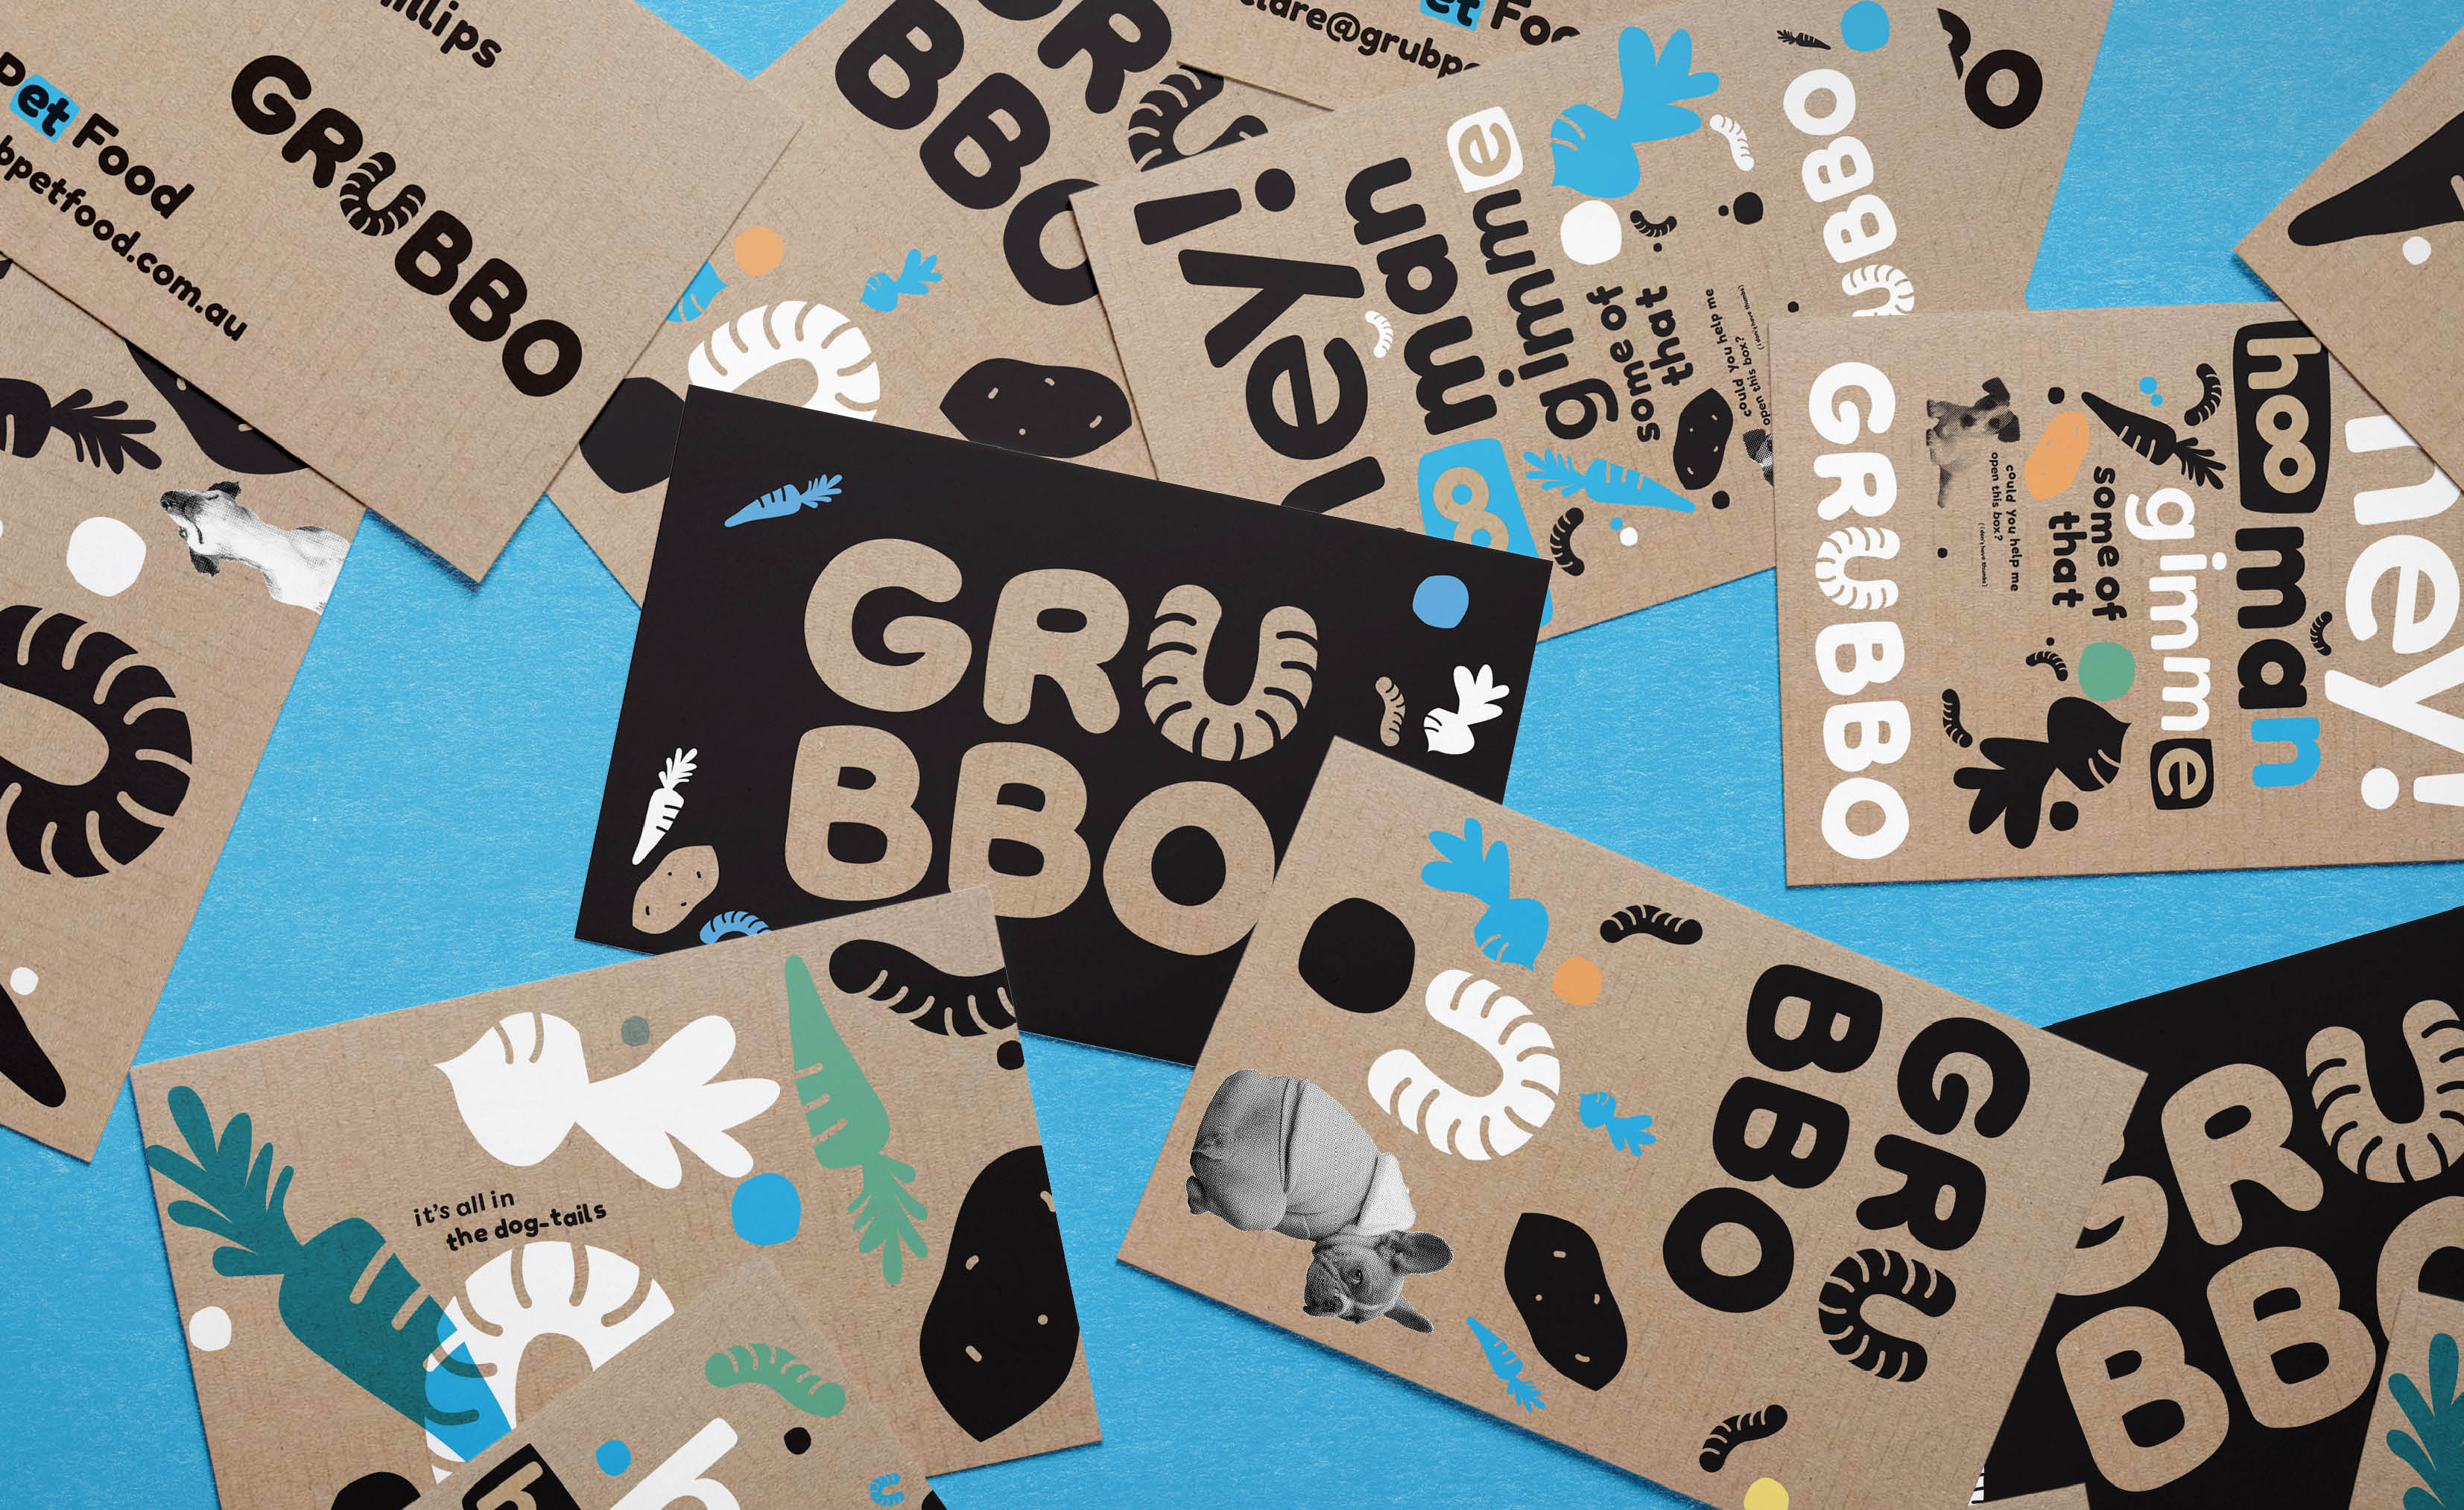 Grubbo business cards